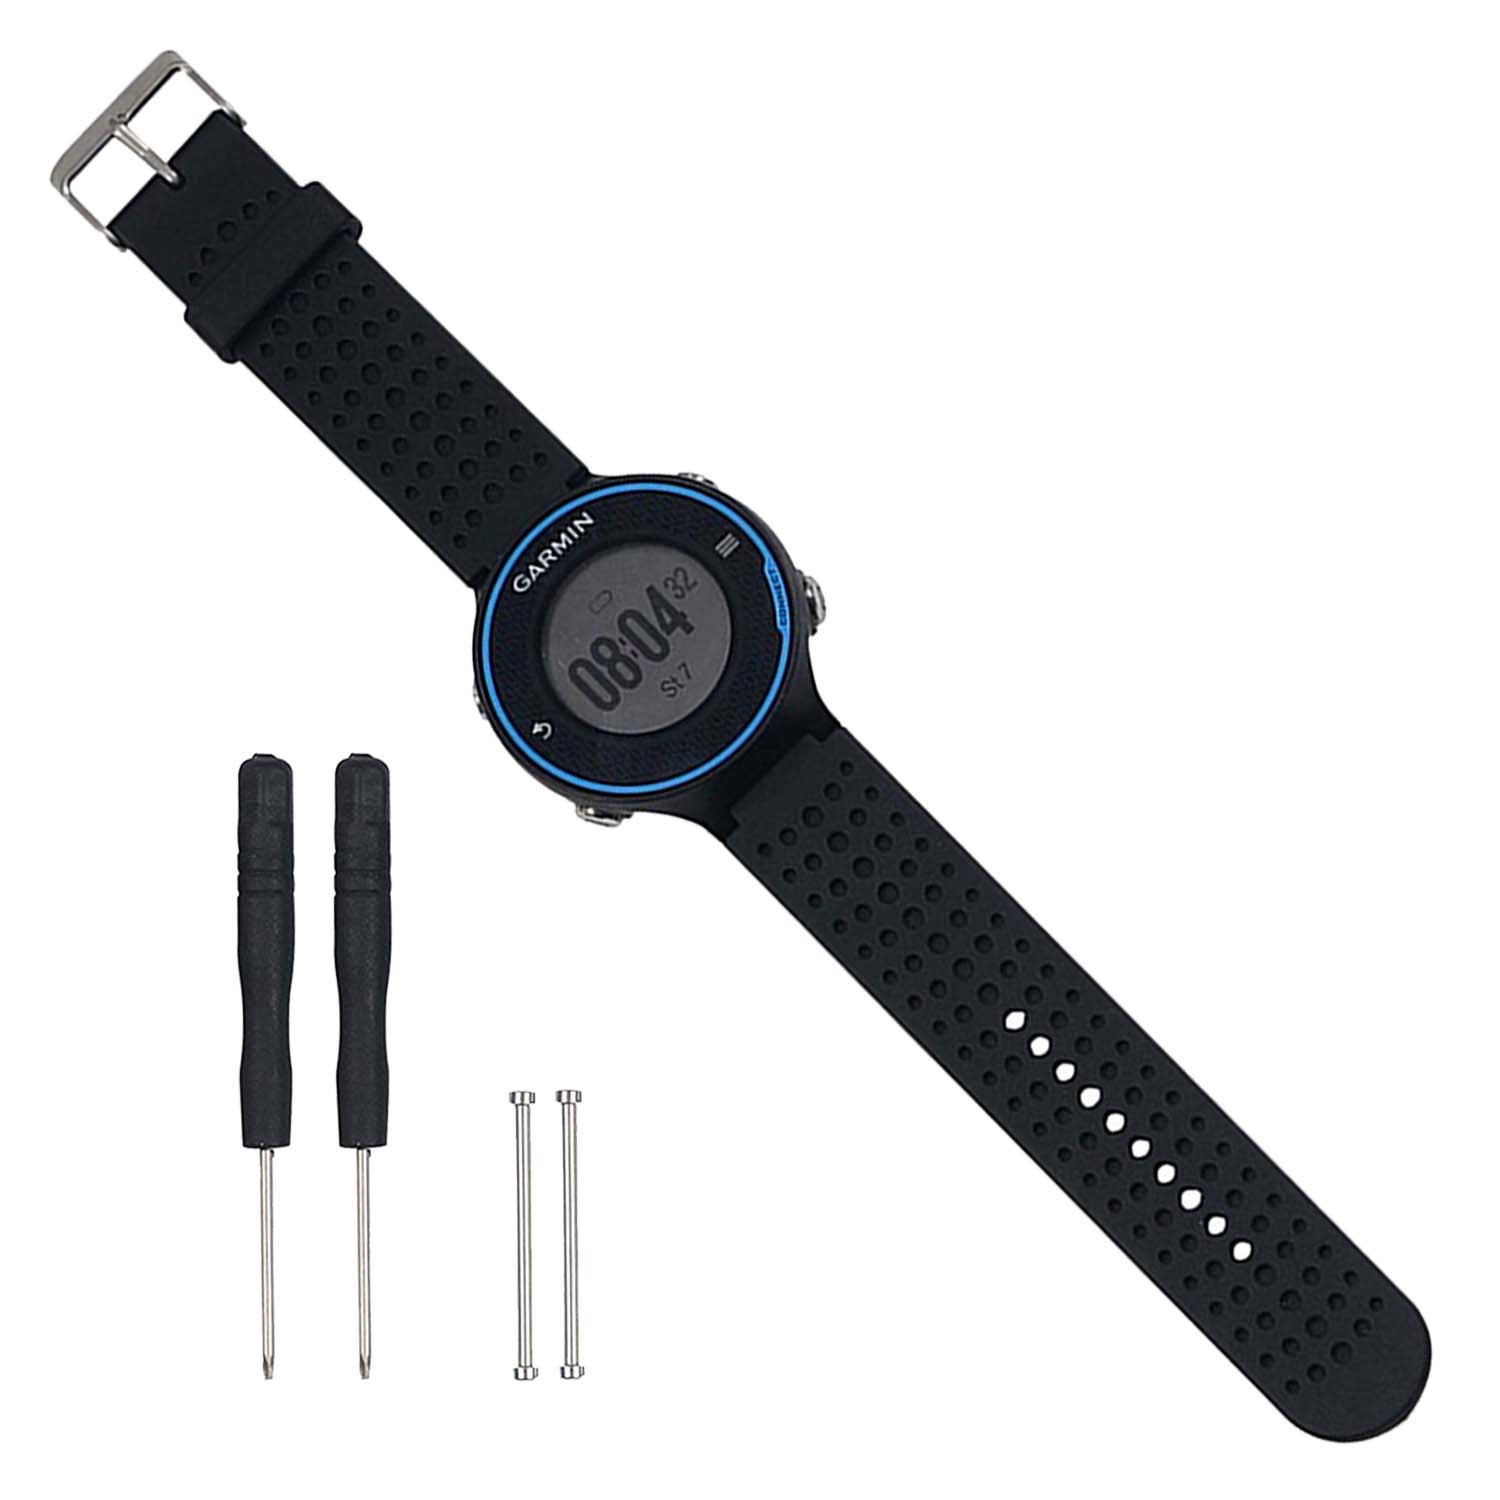  ISABAKE Soft Silicone Sport Band for Forerunner 235 Watch Bands  Compatible with Approach S20 S5 S6 Forerunner 230 220 235 235Lite 620 630  735XT Smartwatch(Frost Blue) : Cell Phones & Accessories